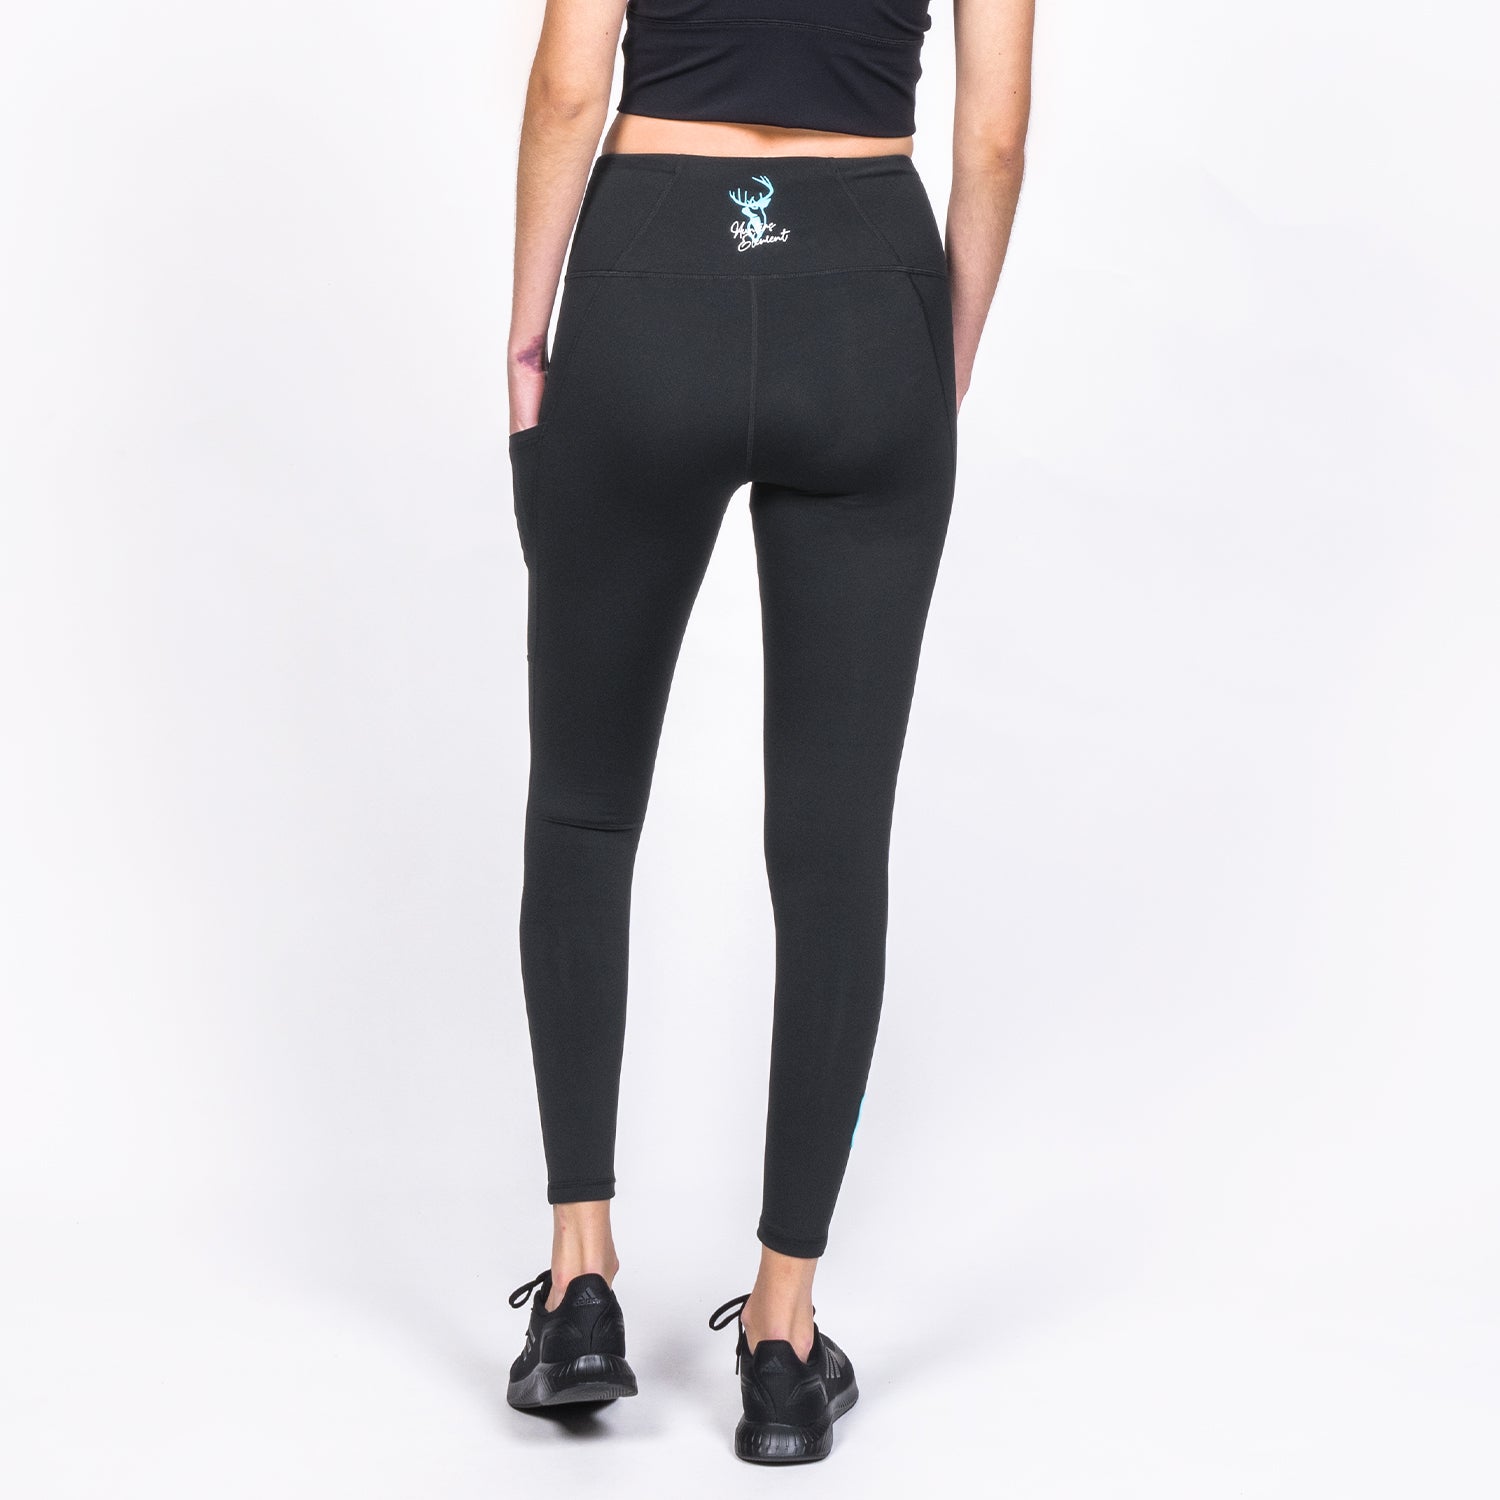 Under Armour Black leggings Womens Size Small - beyond exchange